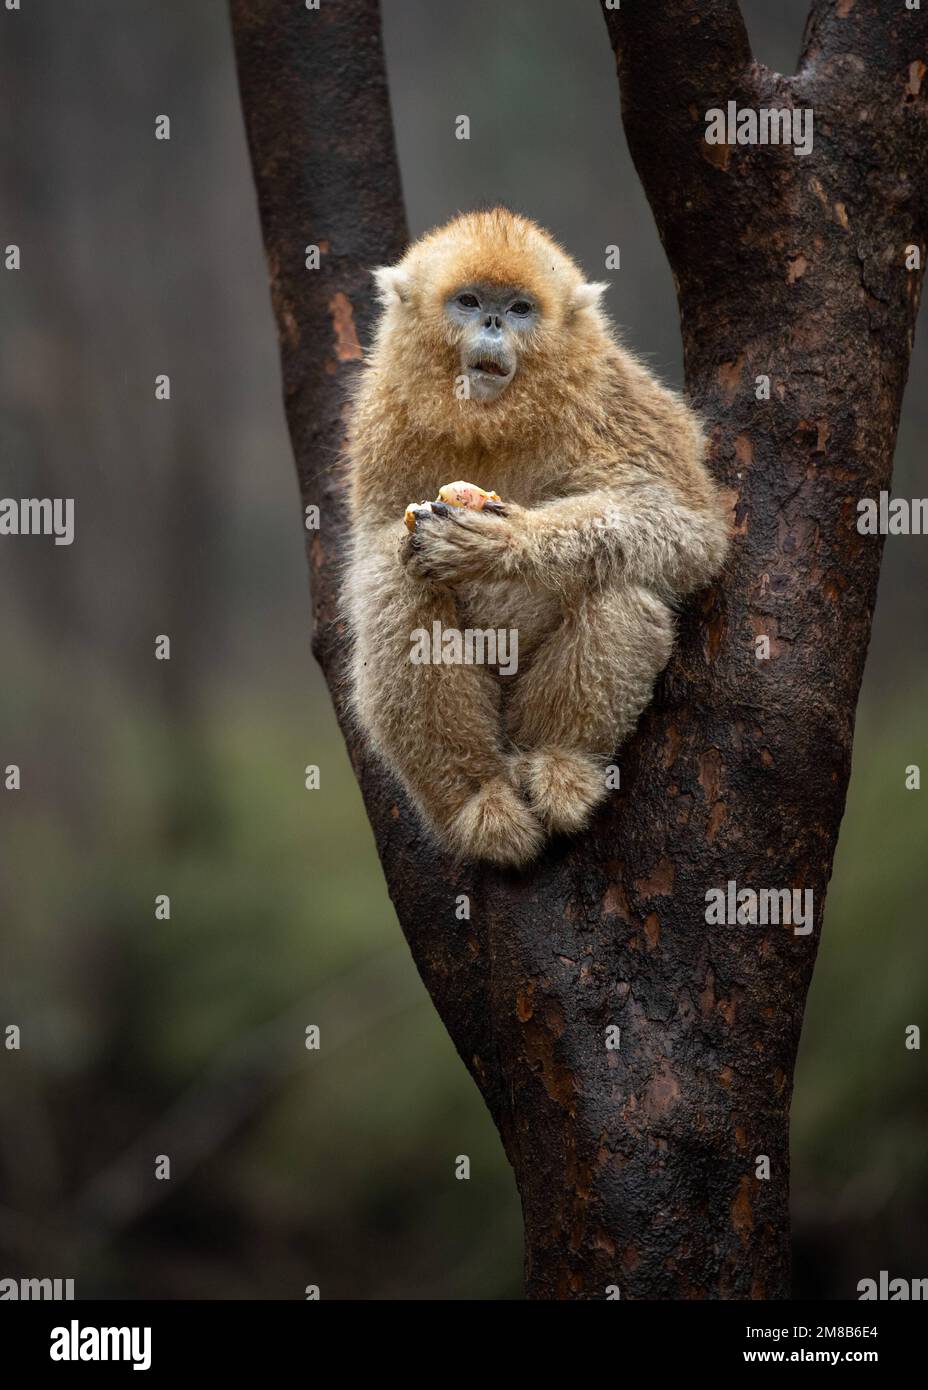 All alone. China: THESE EXPRESSIVE images show wild snub-nosed monkey and their amazing range of emotions that have seen members of this species gain Stock Photo